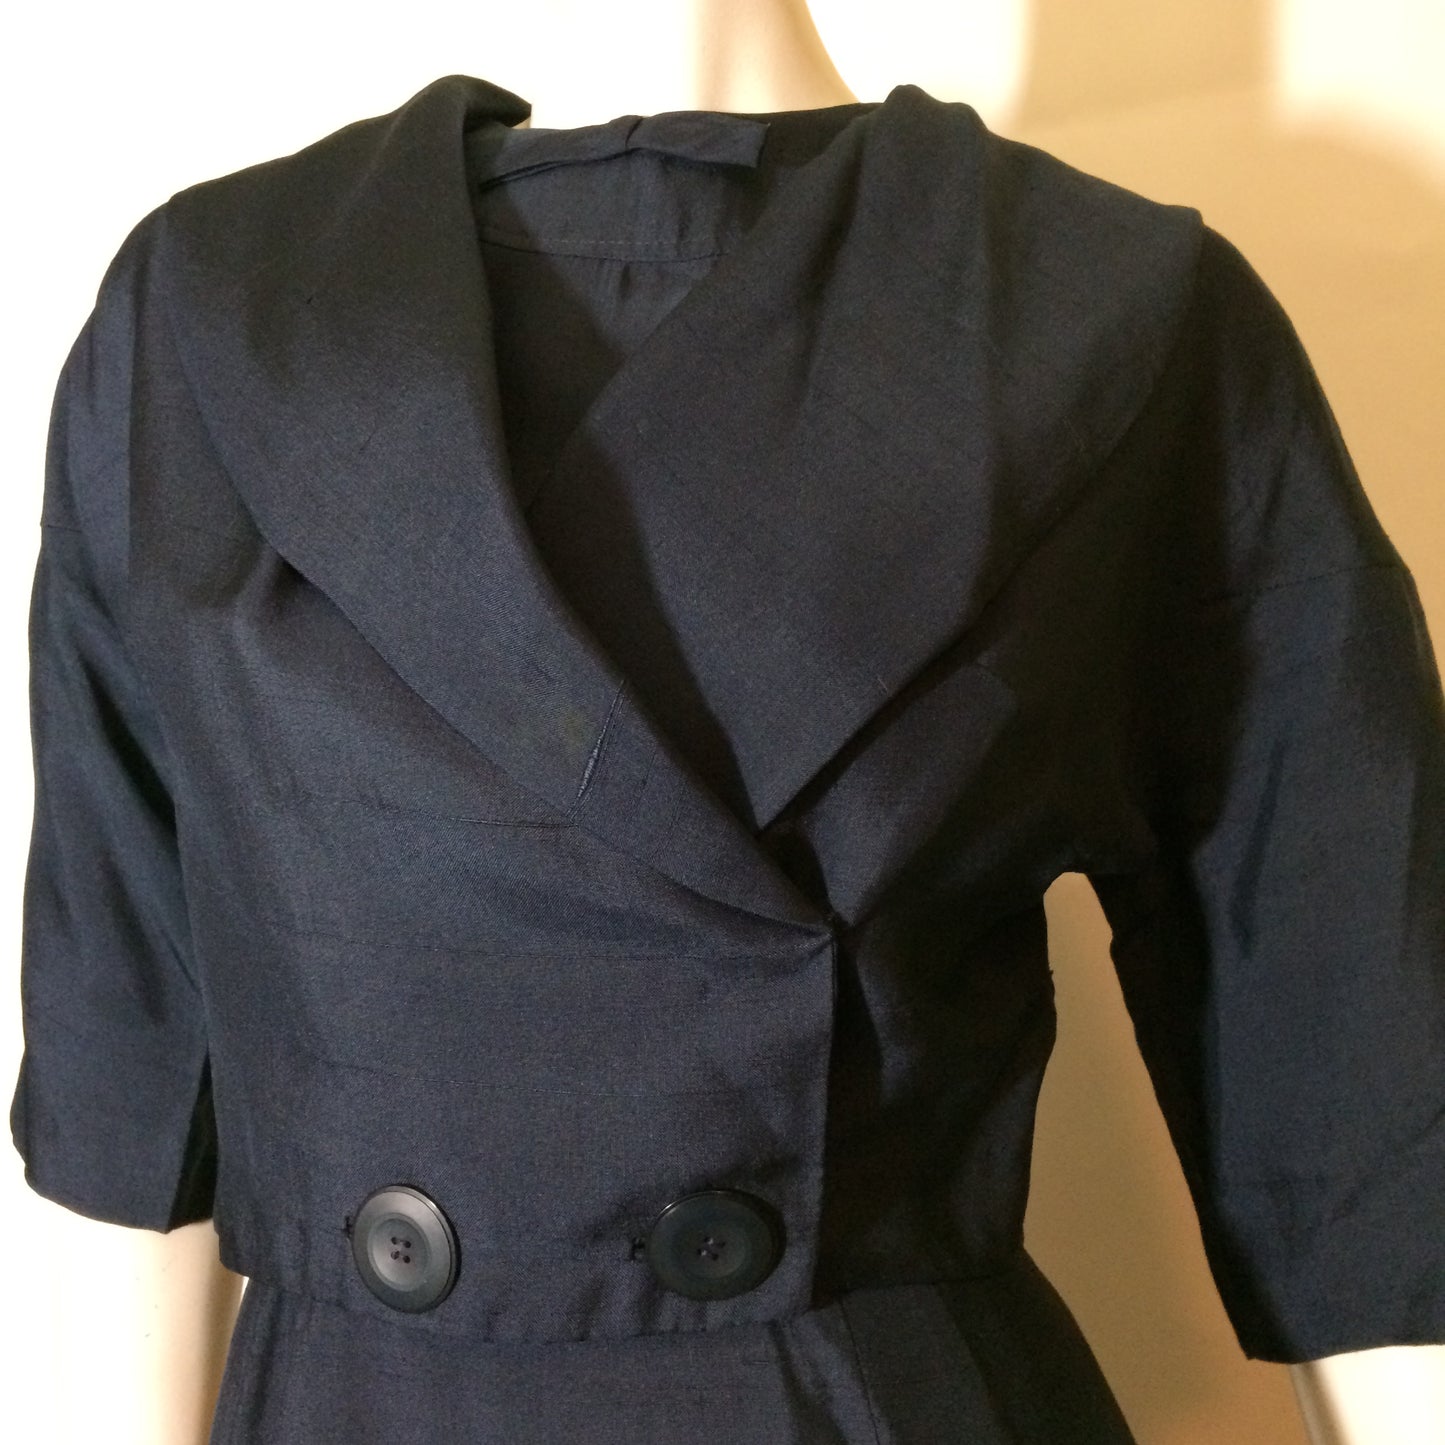 Curve Conscious Blue Bow Trimmed Dress with Cropped Jacket circa 1950s